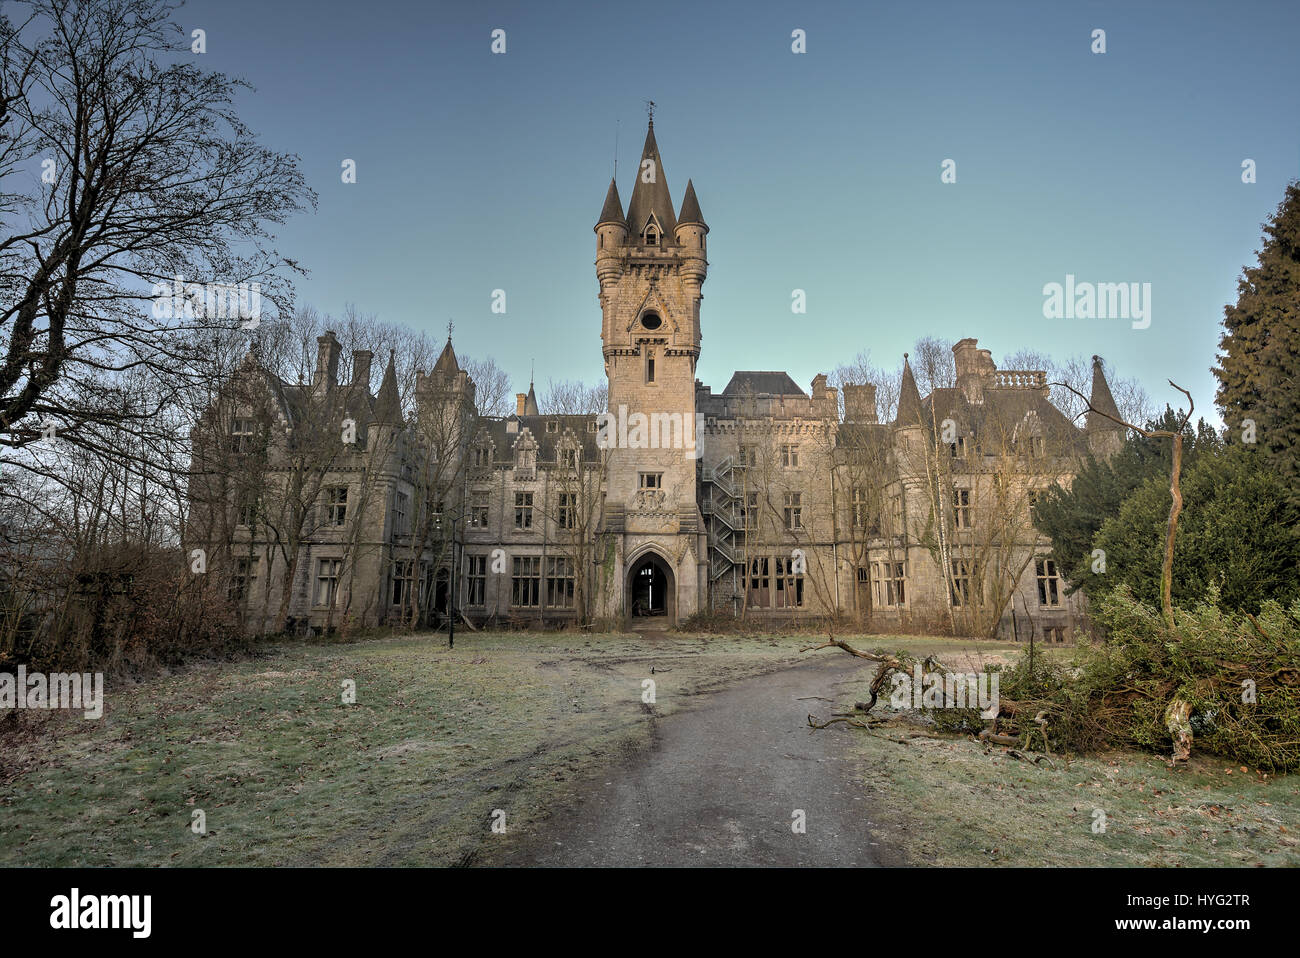 HOUYET, BELGIUM: STUNNING pictures show what could be the most perfect yet abandoned fairy-tale castle that was built by a pioneering English architect. The spectacular images show the outside of the castle, which still looks like something out of a Disney film, while inside the true damage is revealed. Piles of rubble are strewn throughout the building as staircases and walls have crumbled while the floors have been ripped out. Englishman Edward Milner was commissioned in 1866 by Liedekerke-Beaufort family to build Château Miranda in Belgium, more recently known as Château de Noisy. Milner wa Stock Photo